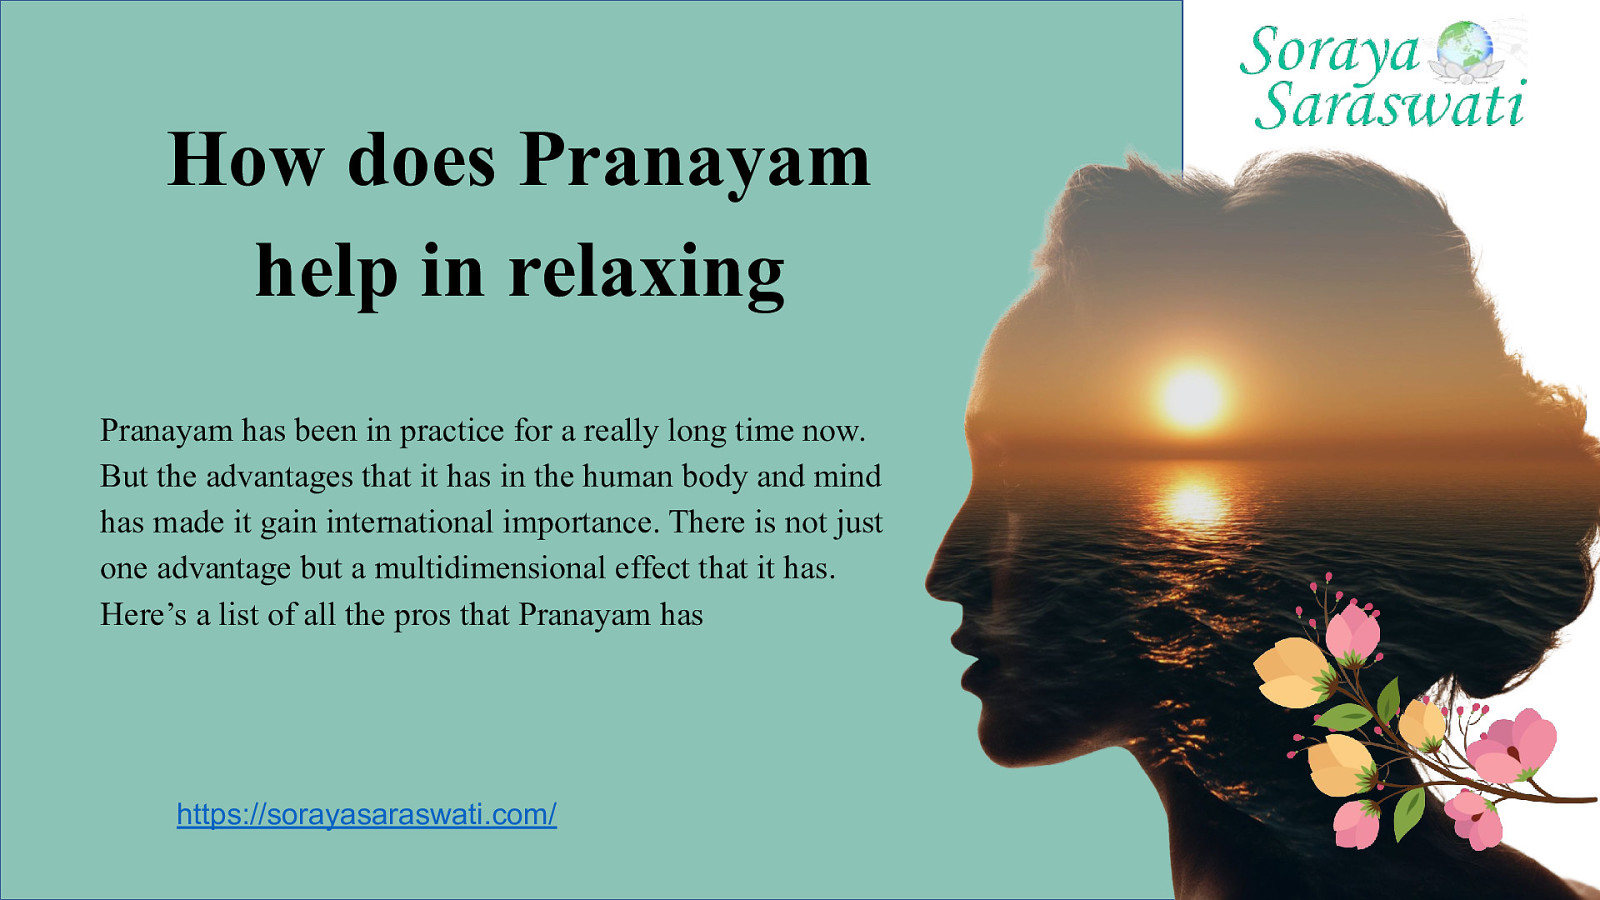 How does Pranayam help in relaxing